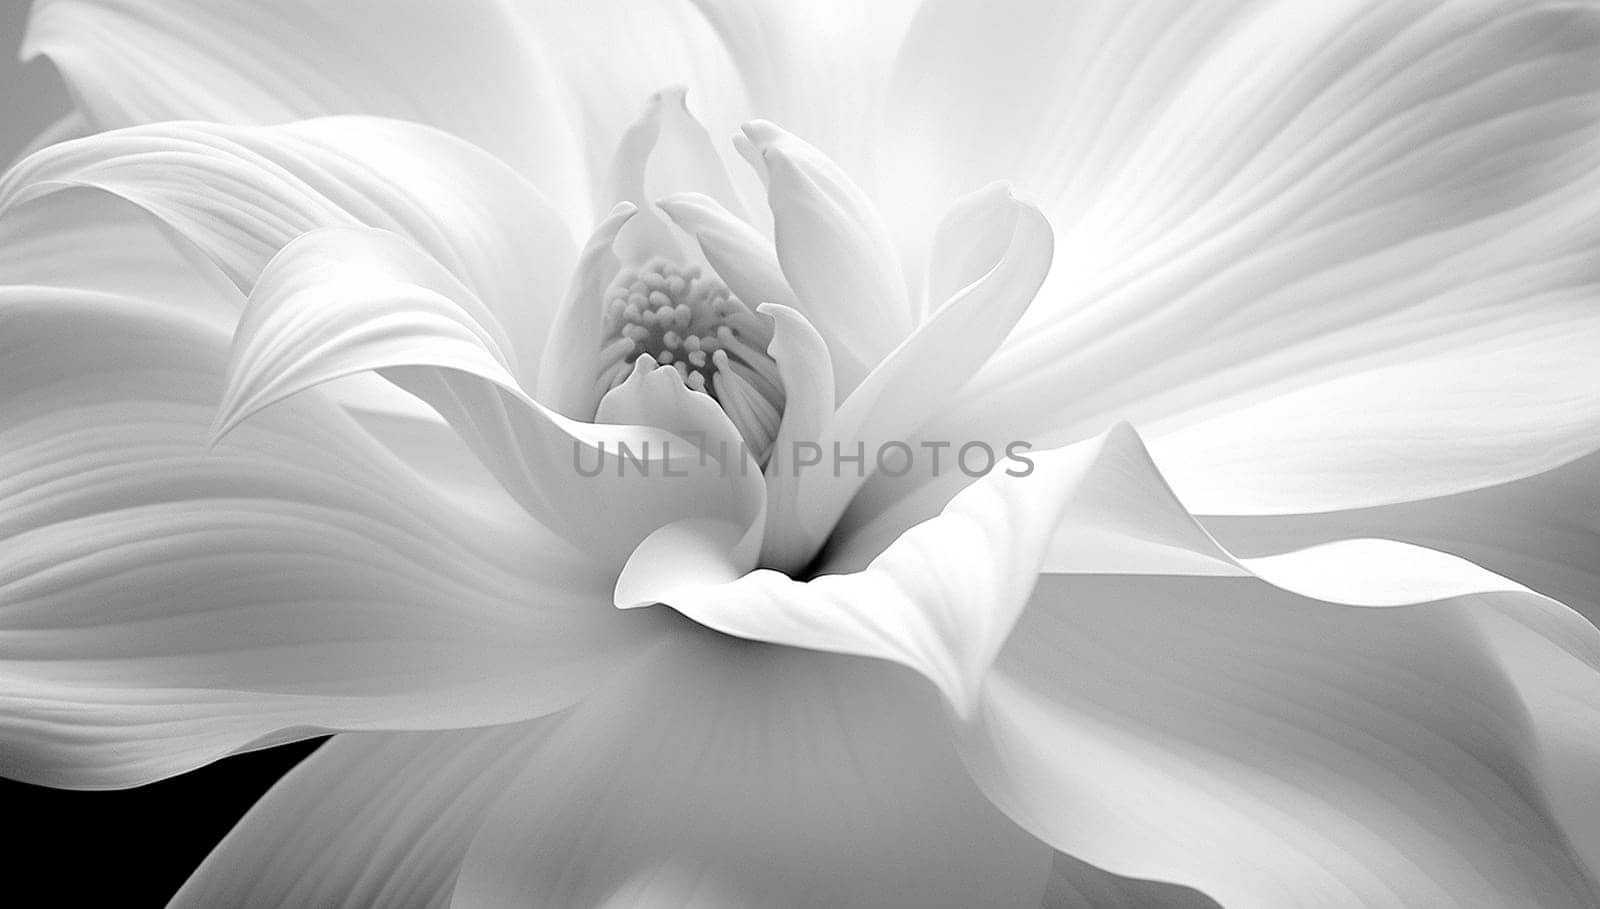 Black and white image of the delicate petals of a Lilly flower against a white background beautiful soft nature design Beauty